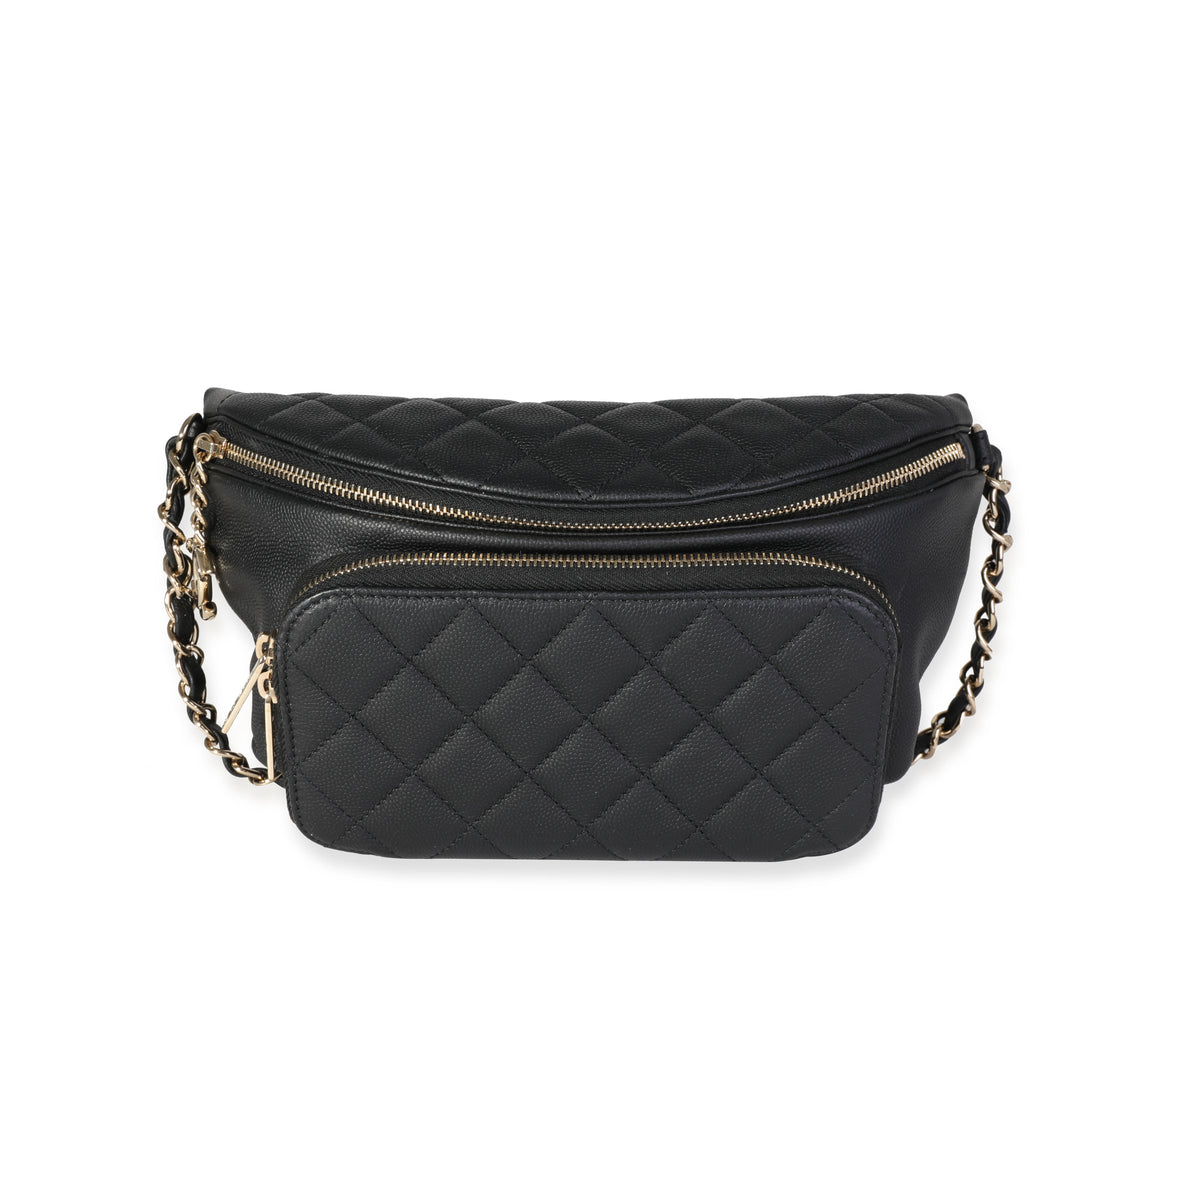 Chanel White Iridescent Calfskin Quilted All About Waist Belt Bag   Labellov  Buy and Sell Authentic Luxury